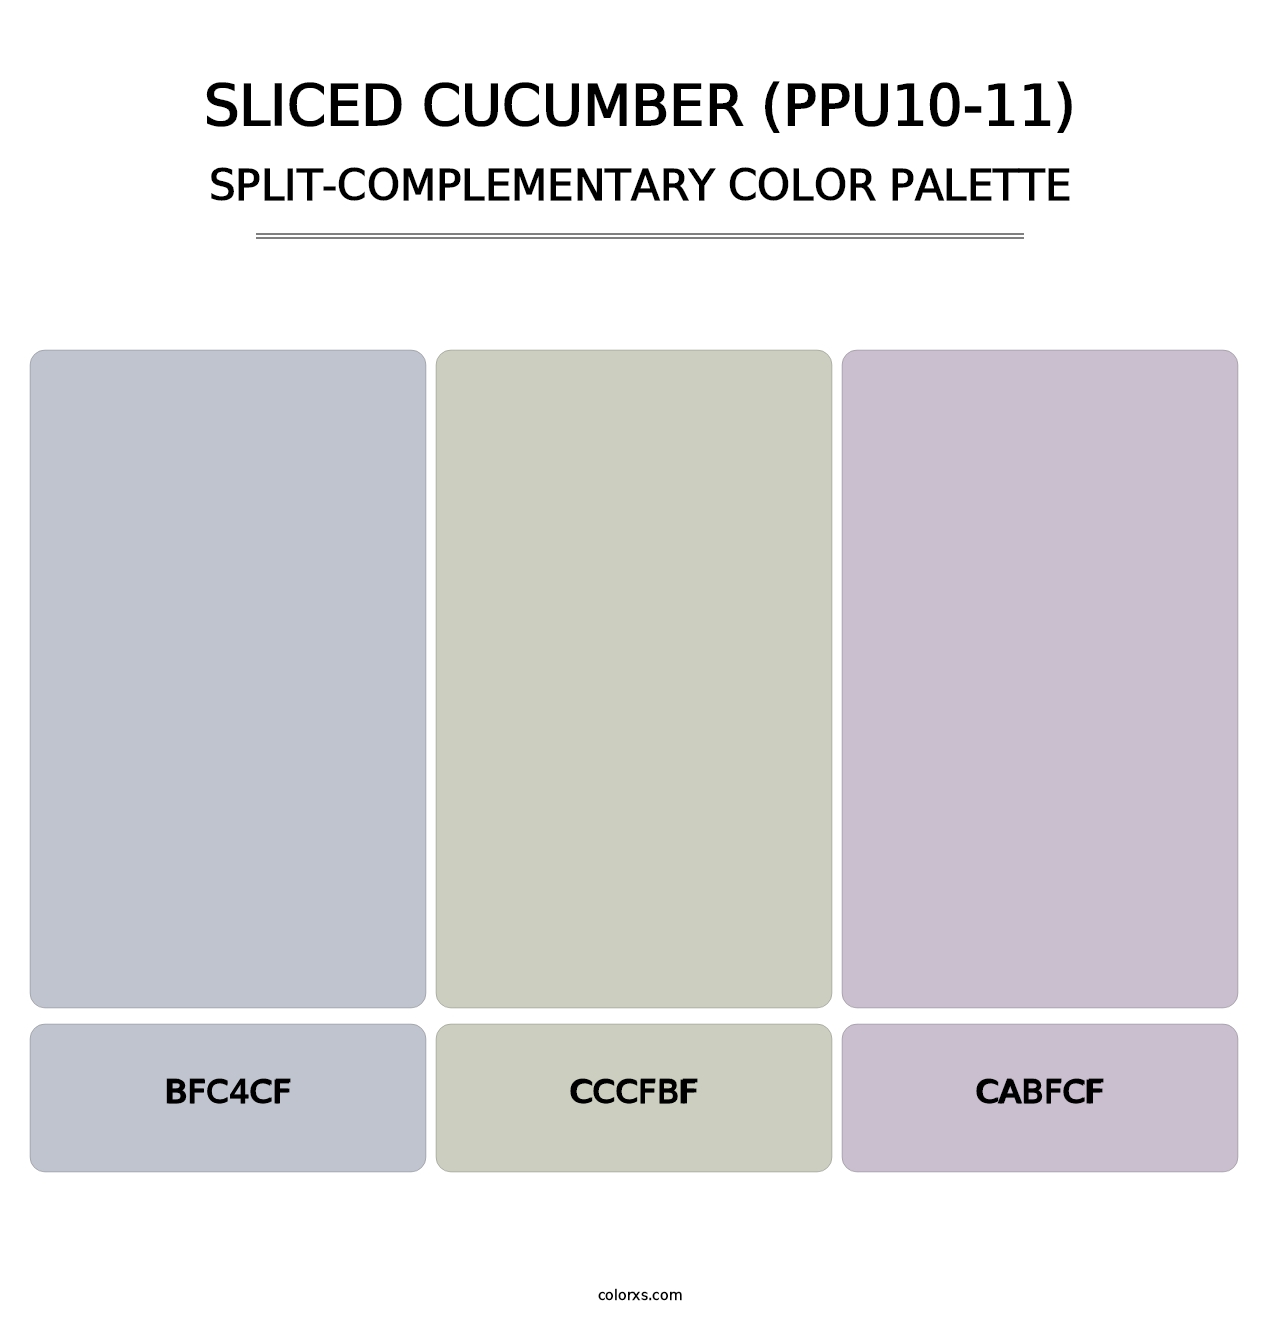 Sliced Cucumber (PPU10-11) - Split-Complementary Color Palette